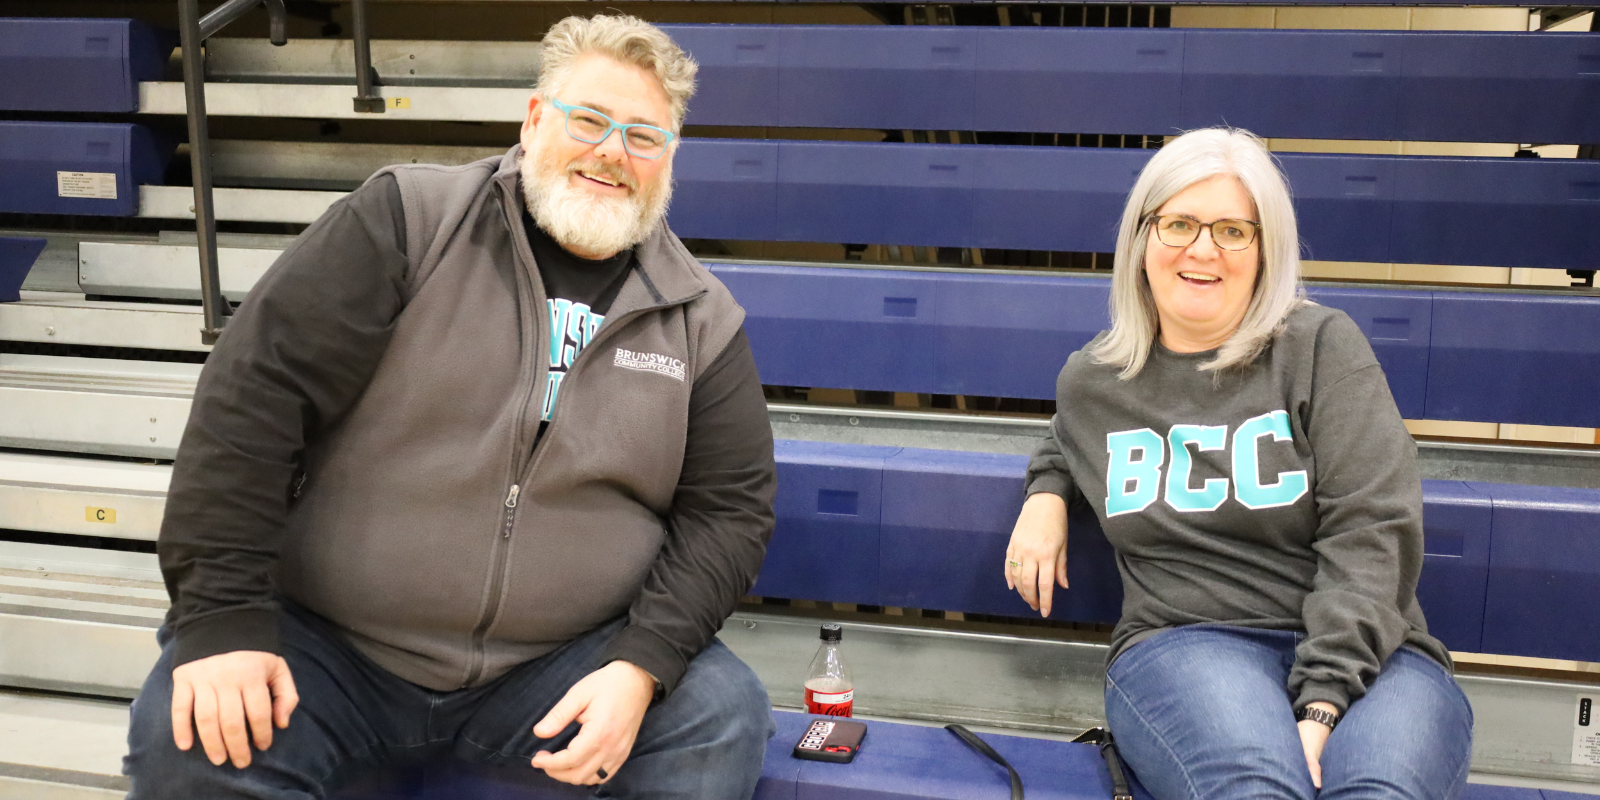 Two employees at BCC Basketball Game